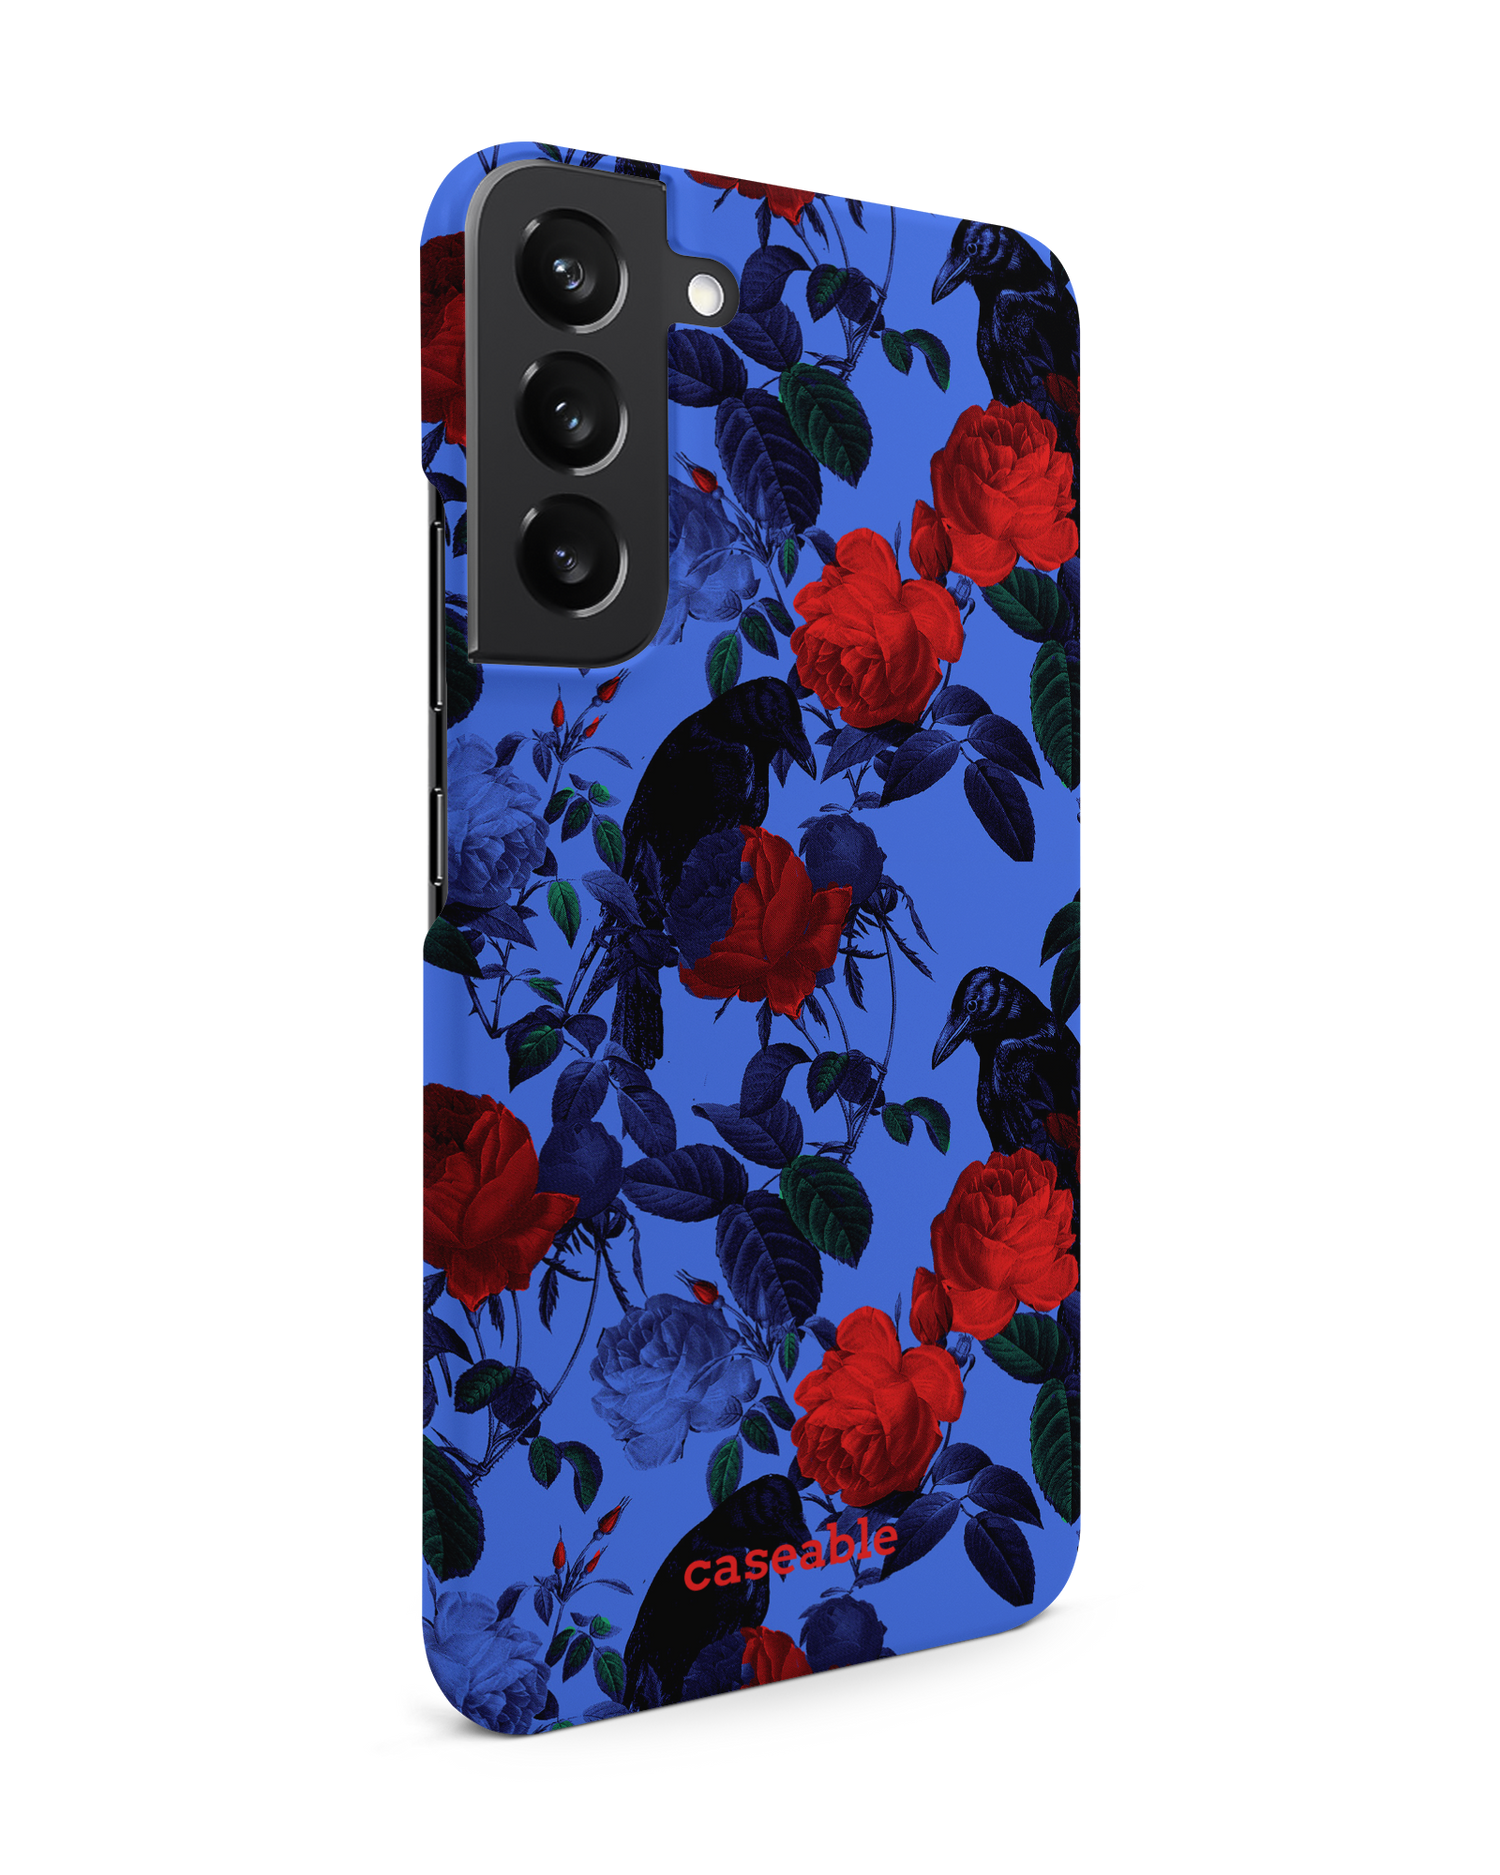 Roses And Ravens Hard Shell Phone Case Samsung Galaxy S22 Plus 5G: View from the left side